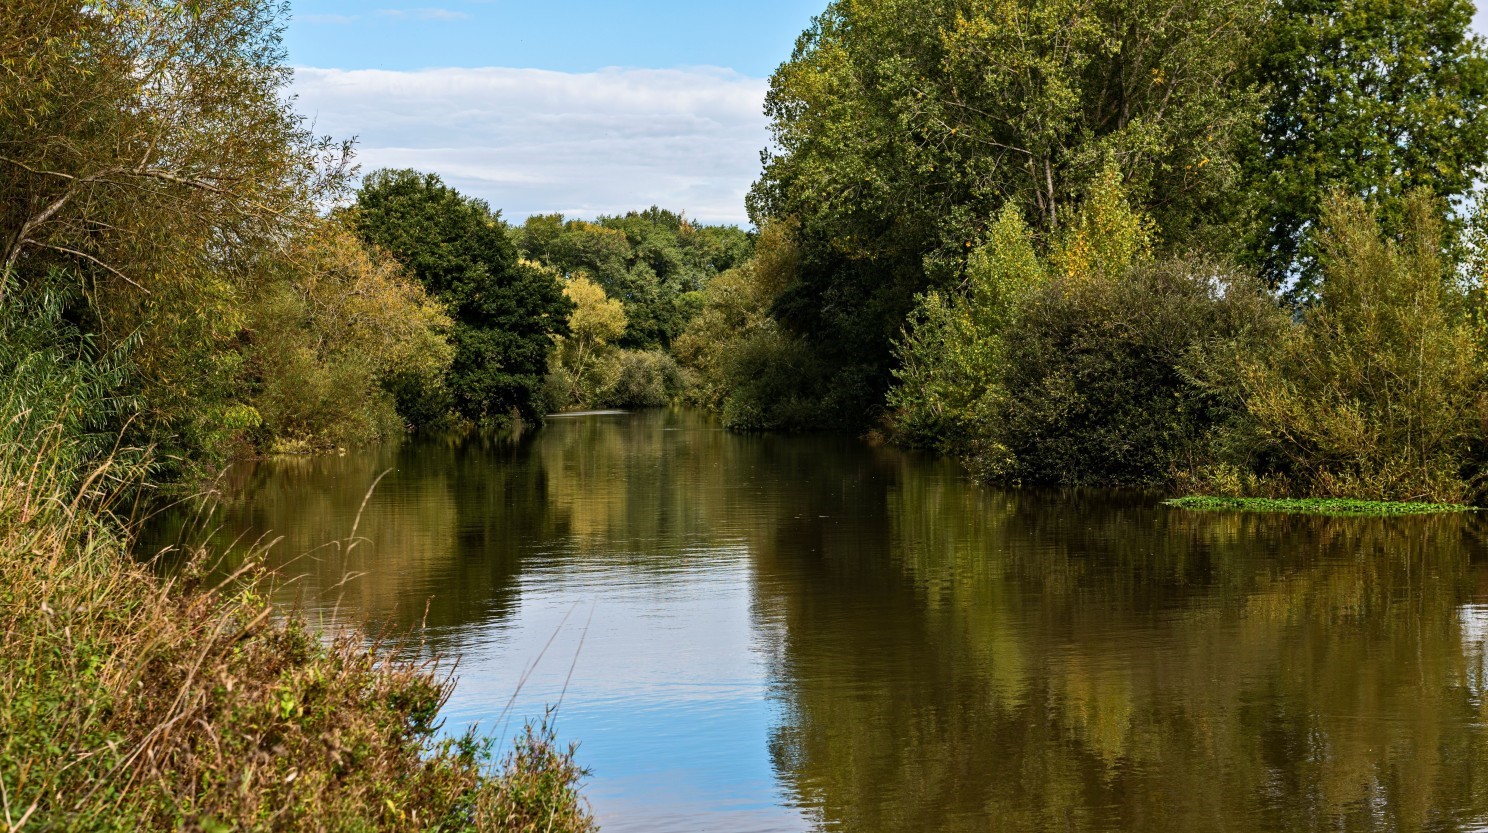 View of a tranquil river bordered by trees and greenery in South East England